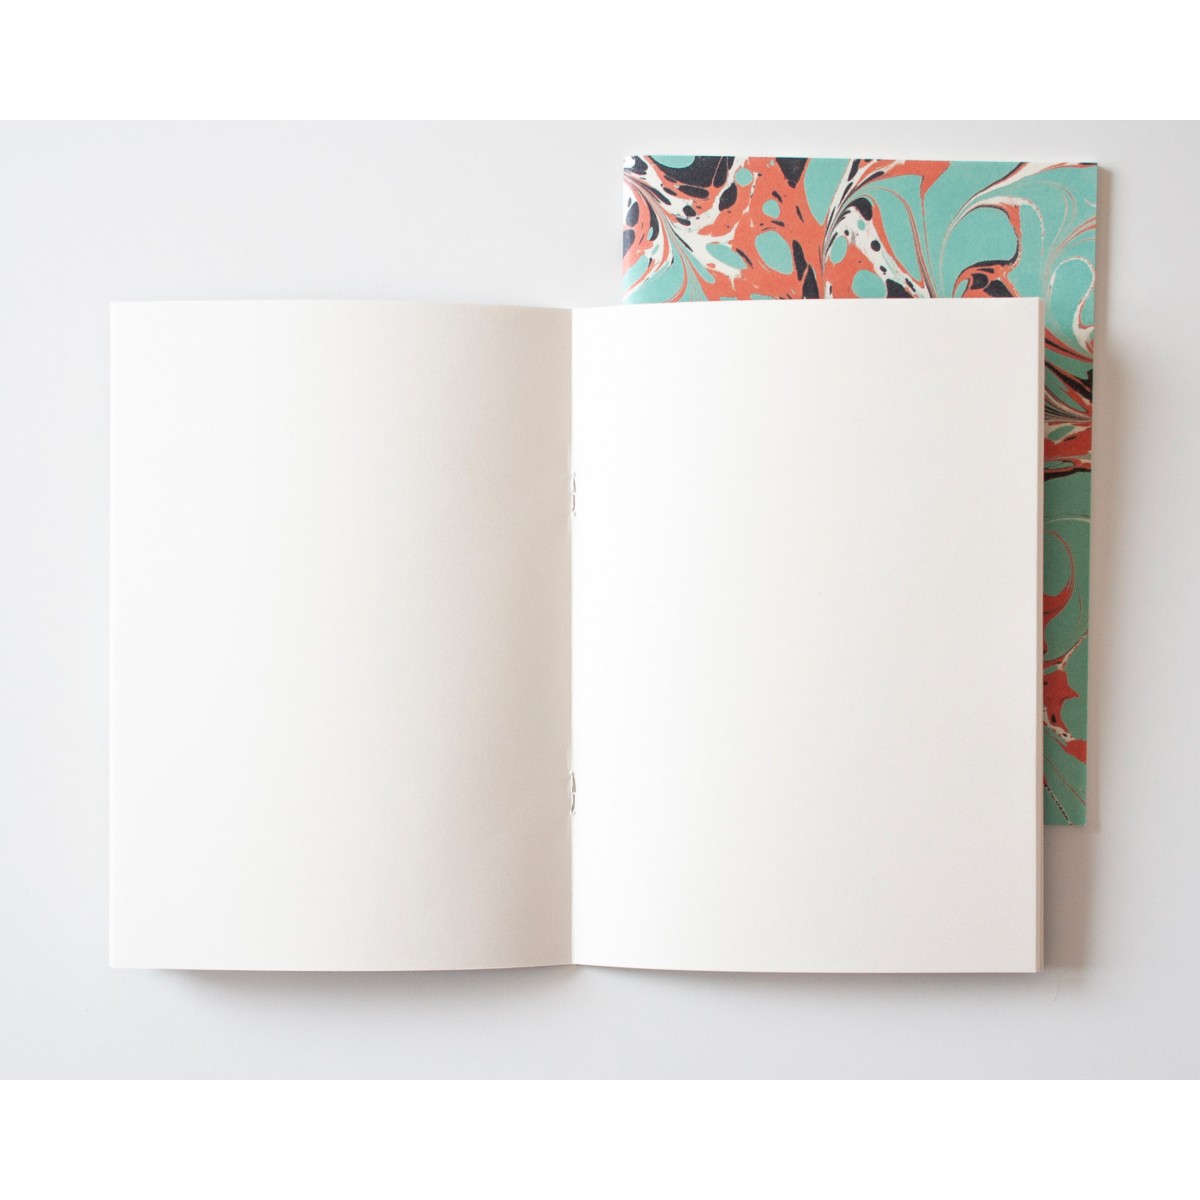 Notizheft A5 Marmor mint koralle // Papaya paper products